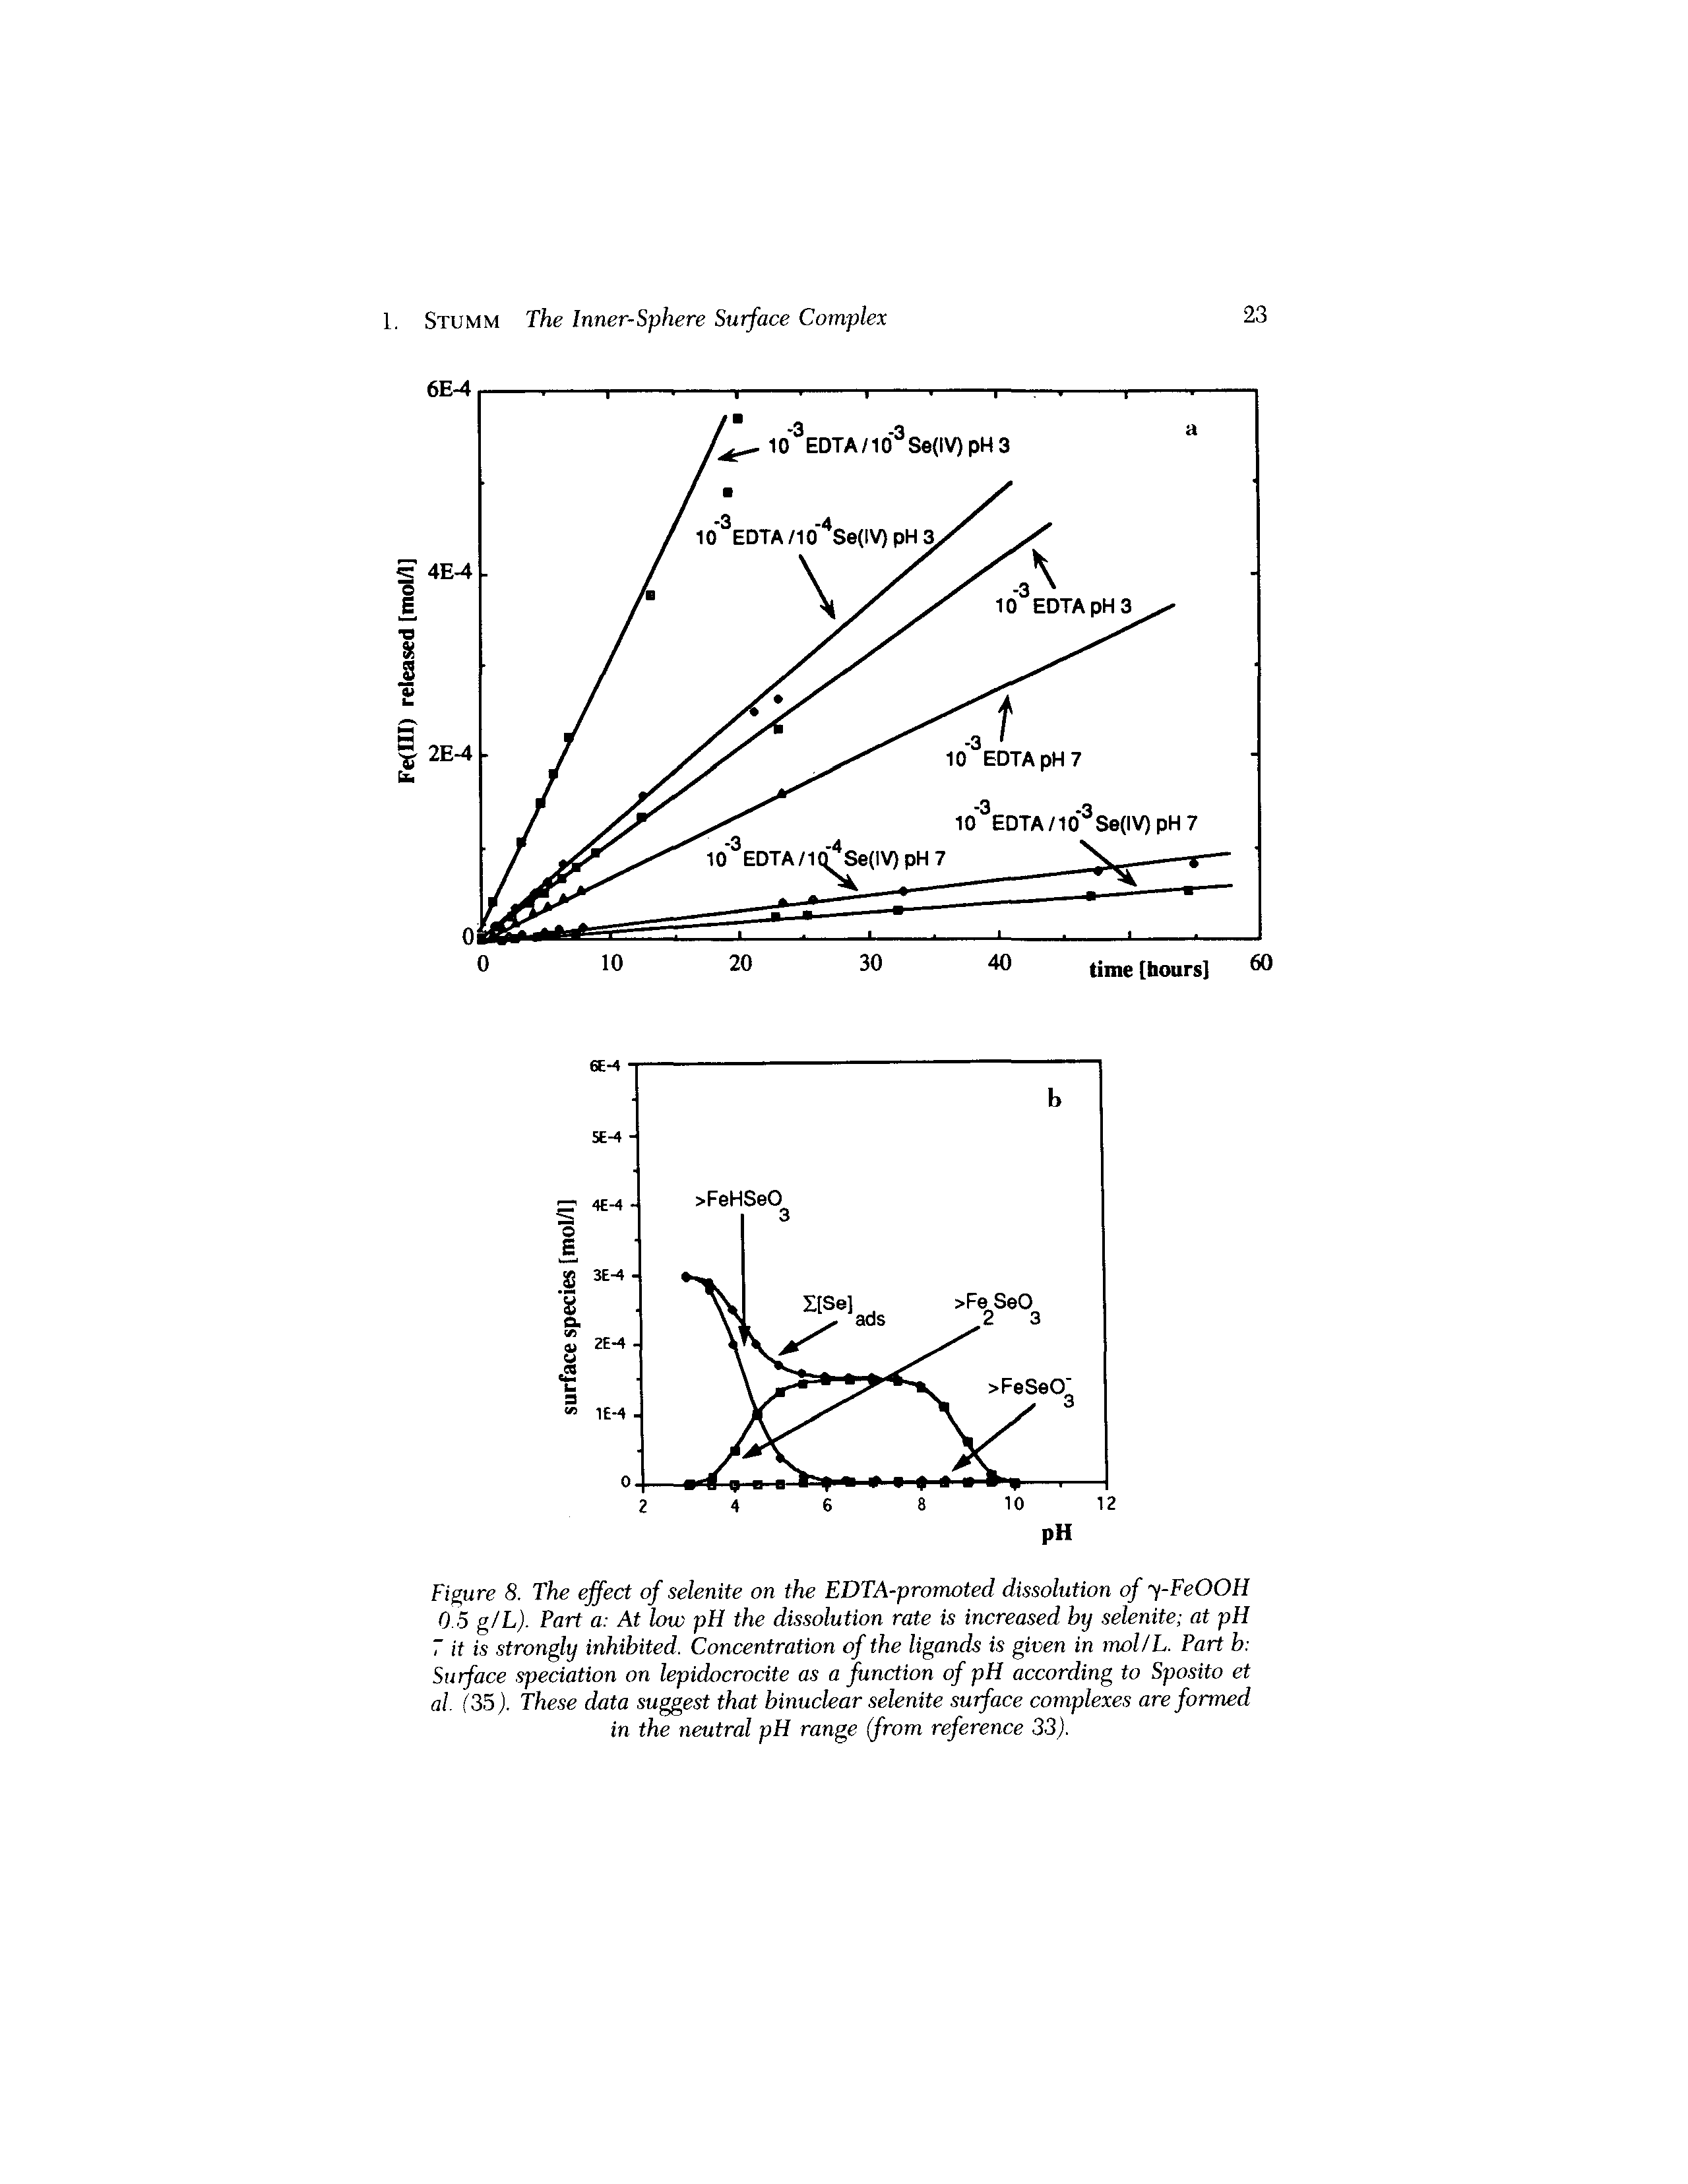 Figure 8. The effect of selenite on the EDTA-promoted dissolution of y-FeOOH 0.5 gIL). Part a At low pH the dissolution rate is increased by selenite at pH 7 it is strongly inhibited. Concentration of the ligands is given in inol/L. Part b Surface speciation on lepidocrocite as a function of pH according to Sposito et al. (35). These data suggest that binuclear selenite surface complexes are formed in the neutral pH range (from reference 33).